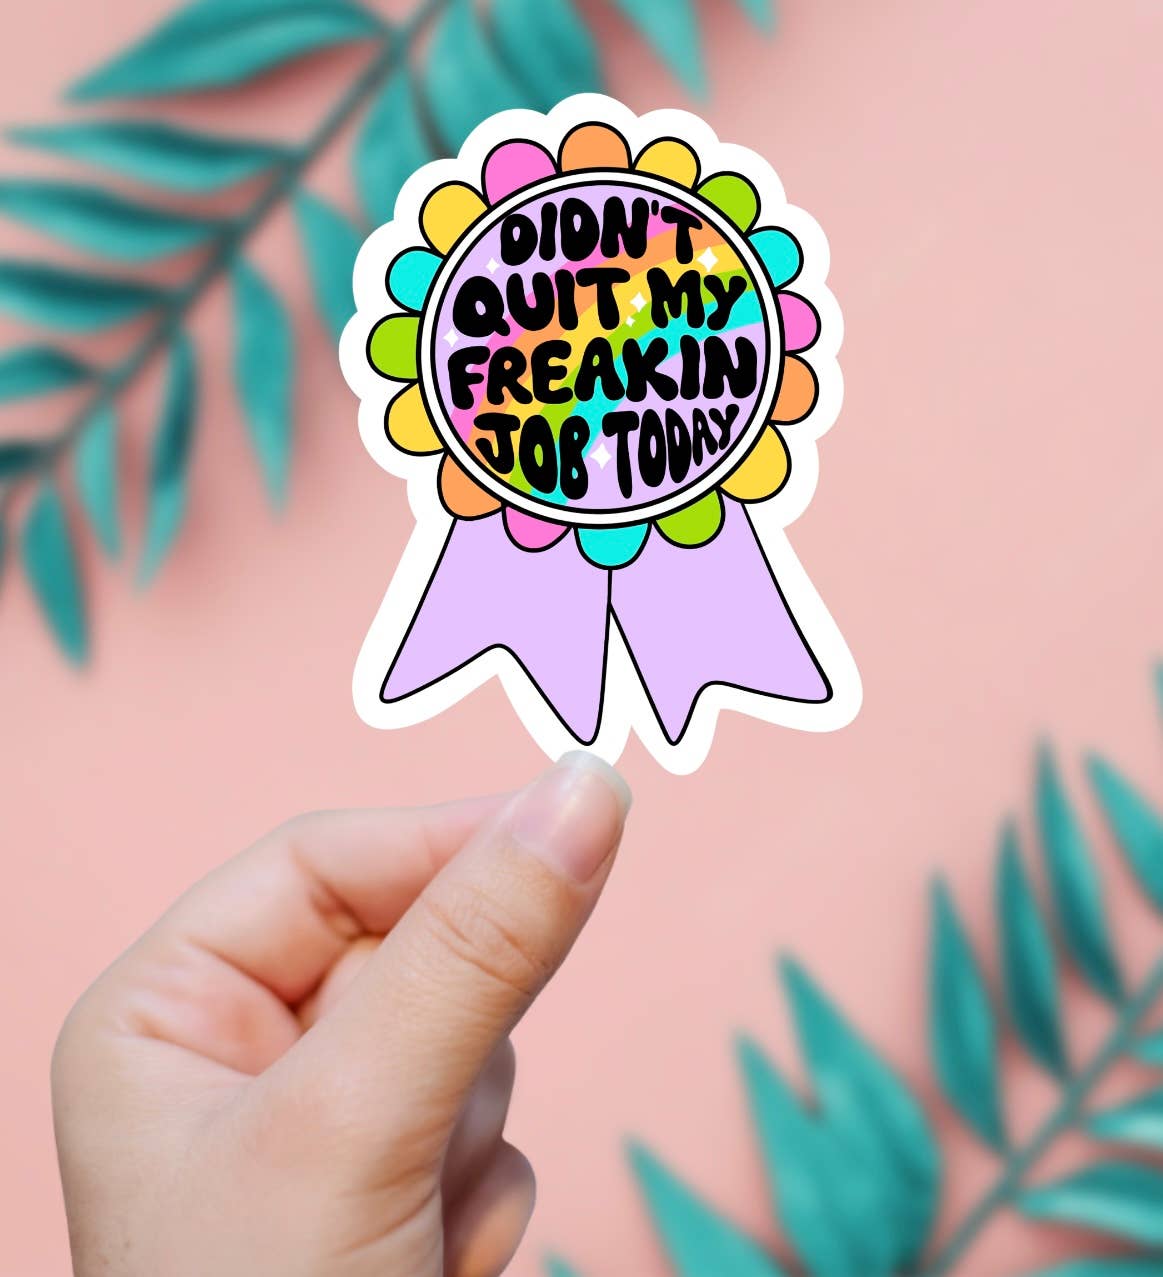 Didn’t Quit My Freakin Job Today Sticker - Storm and Sky Shoppe